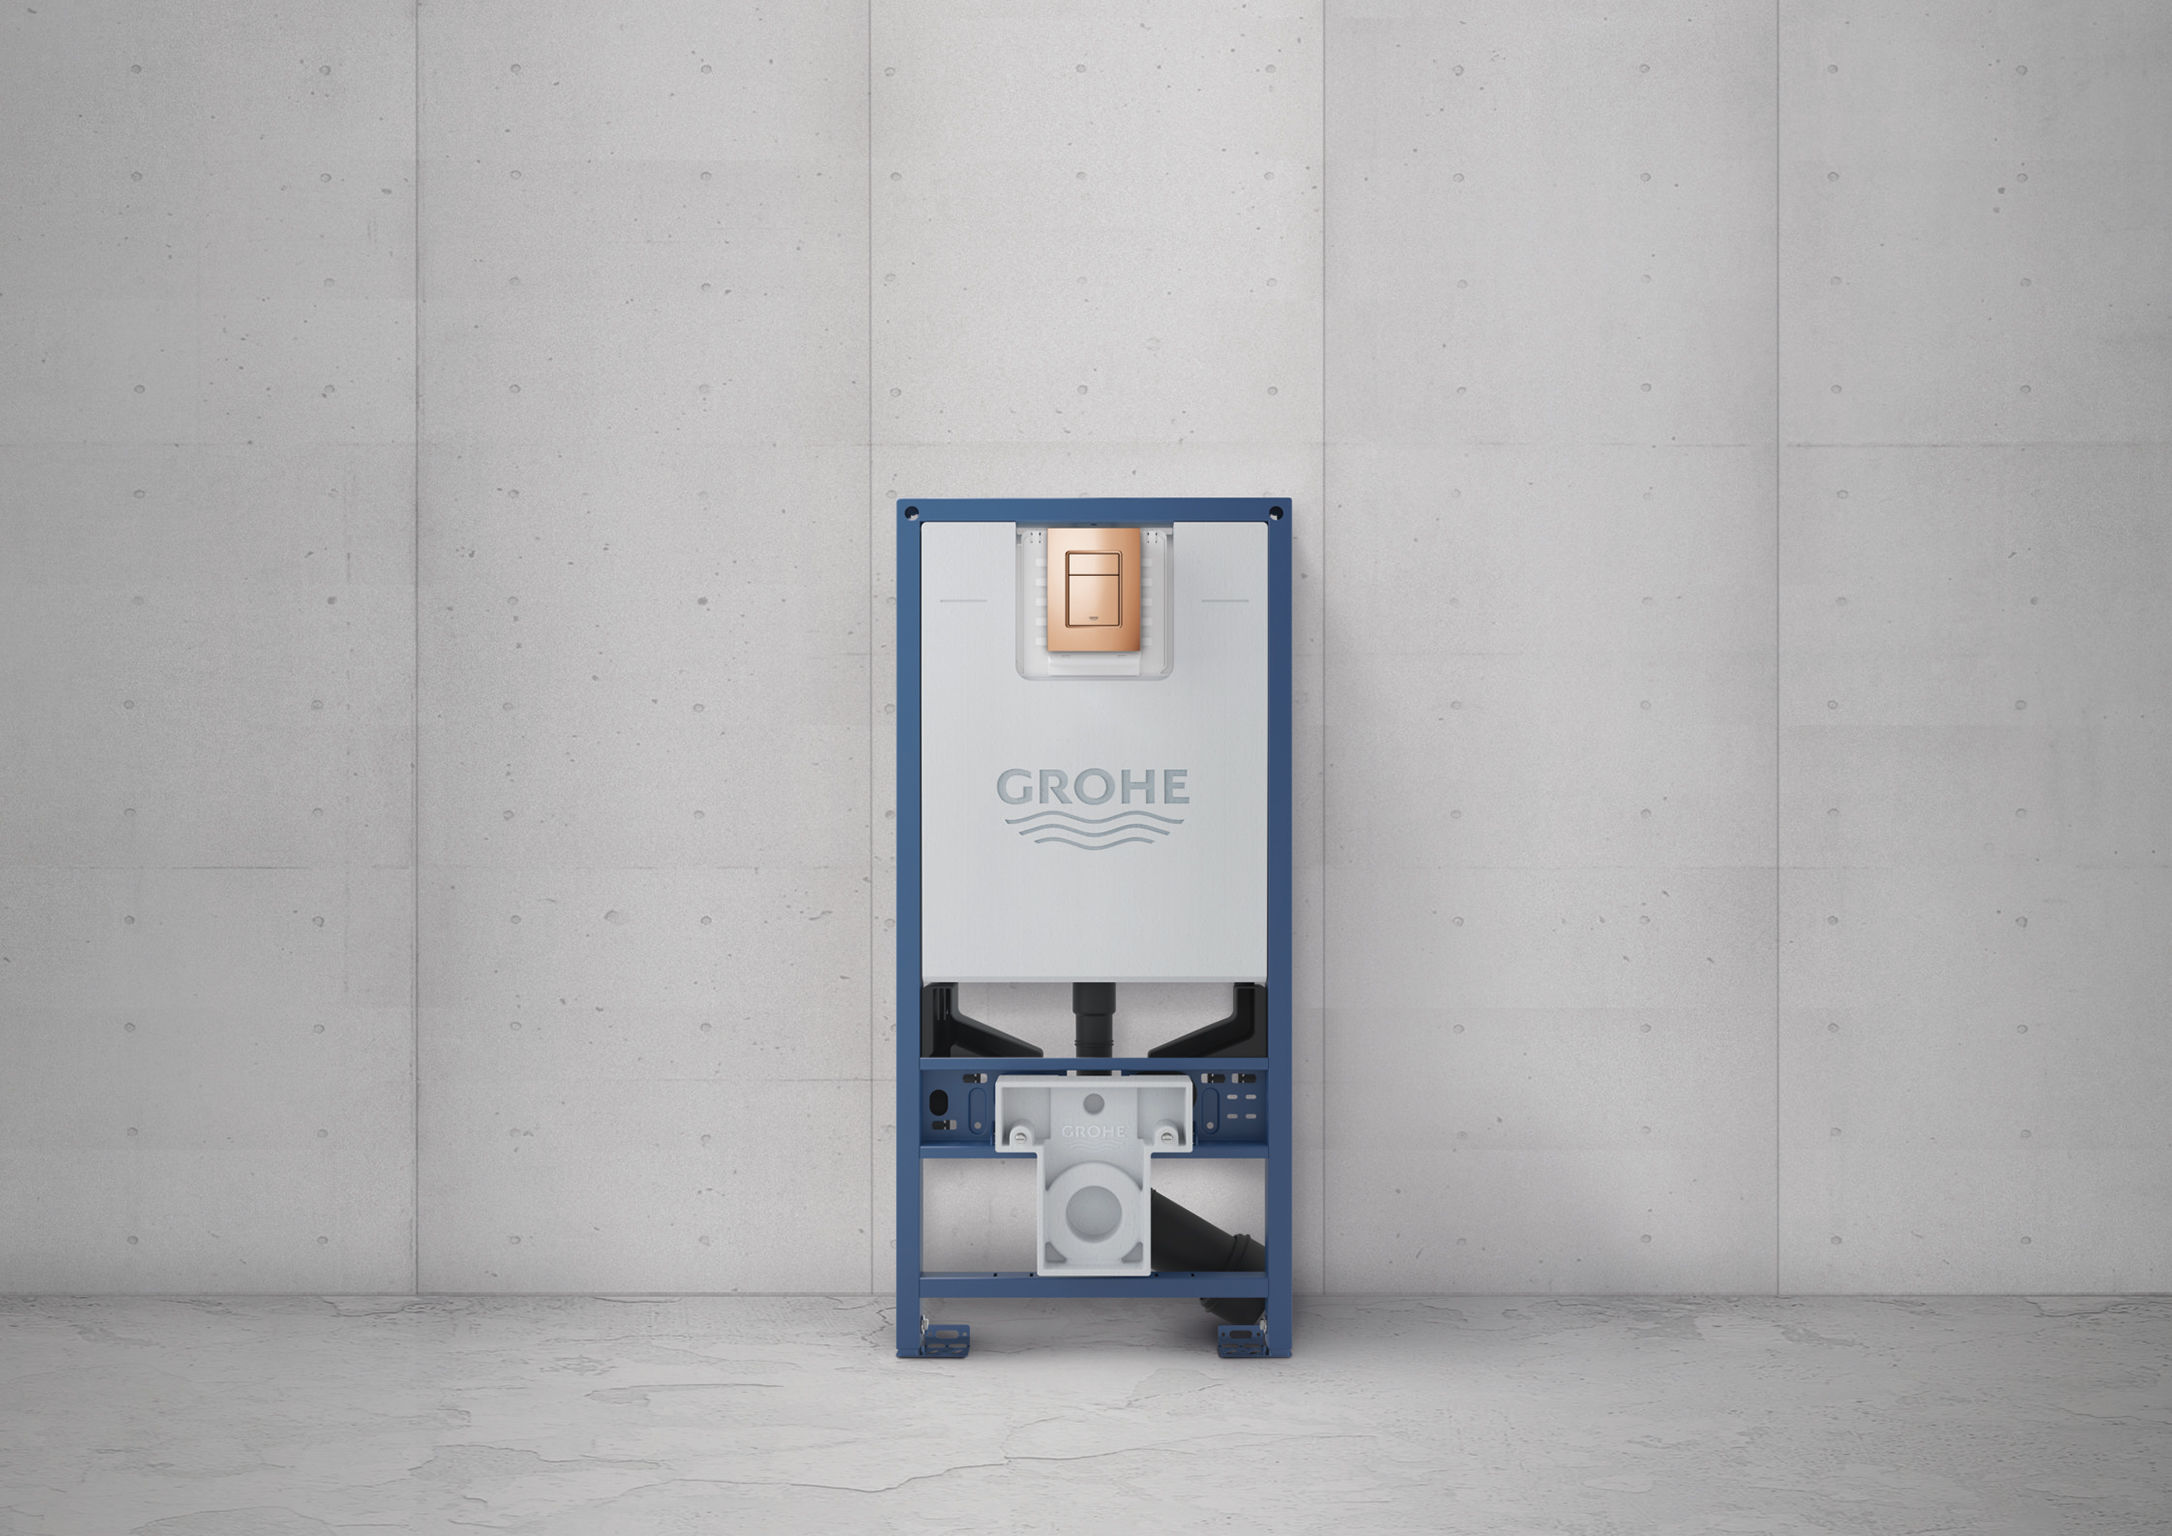 Grohe If World Design Guide